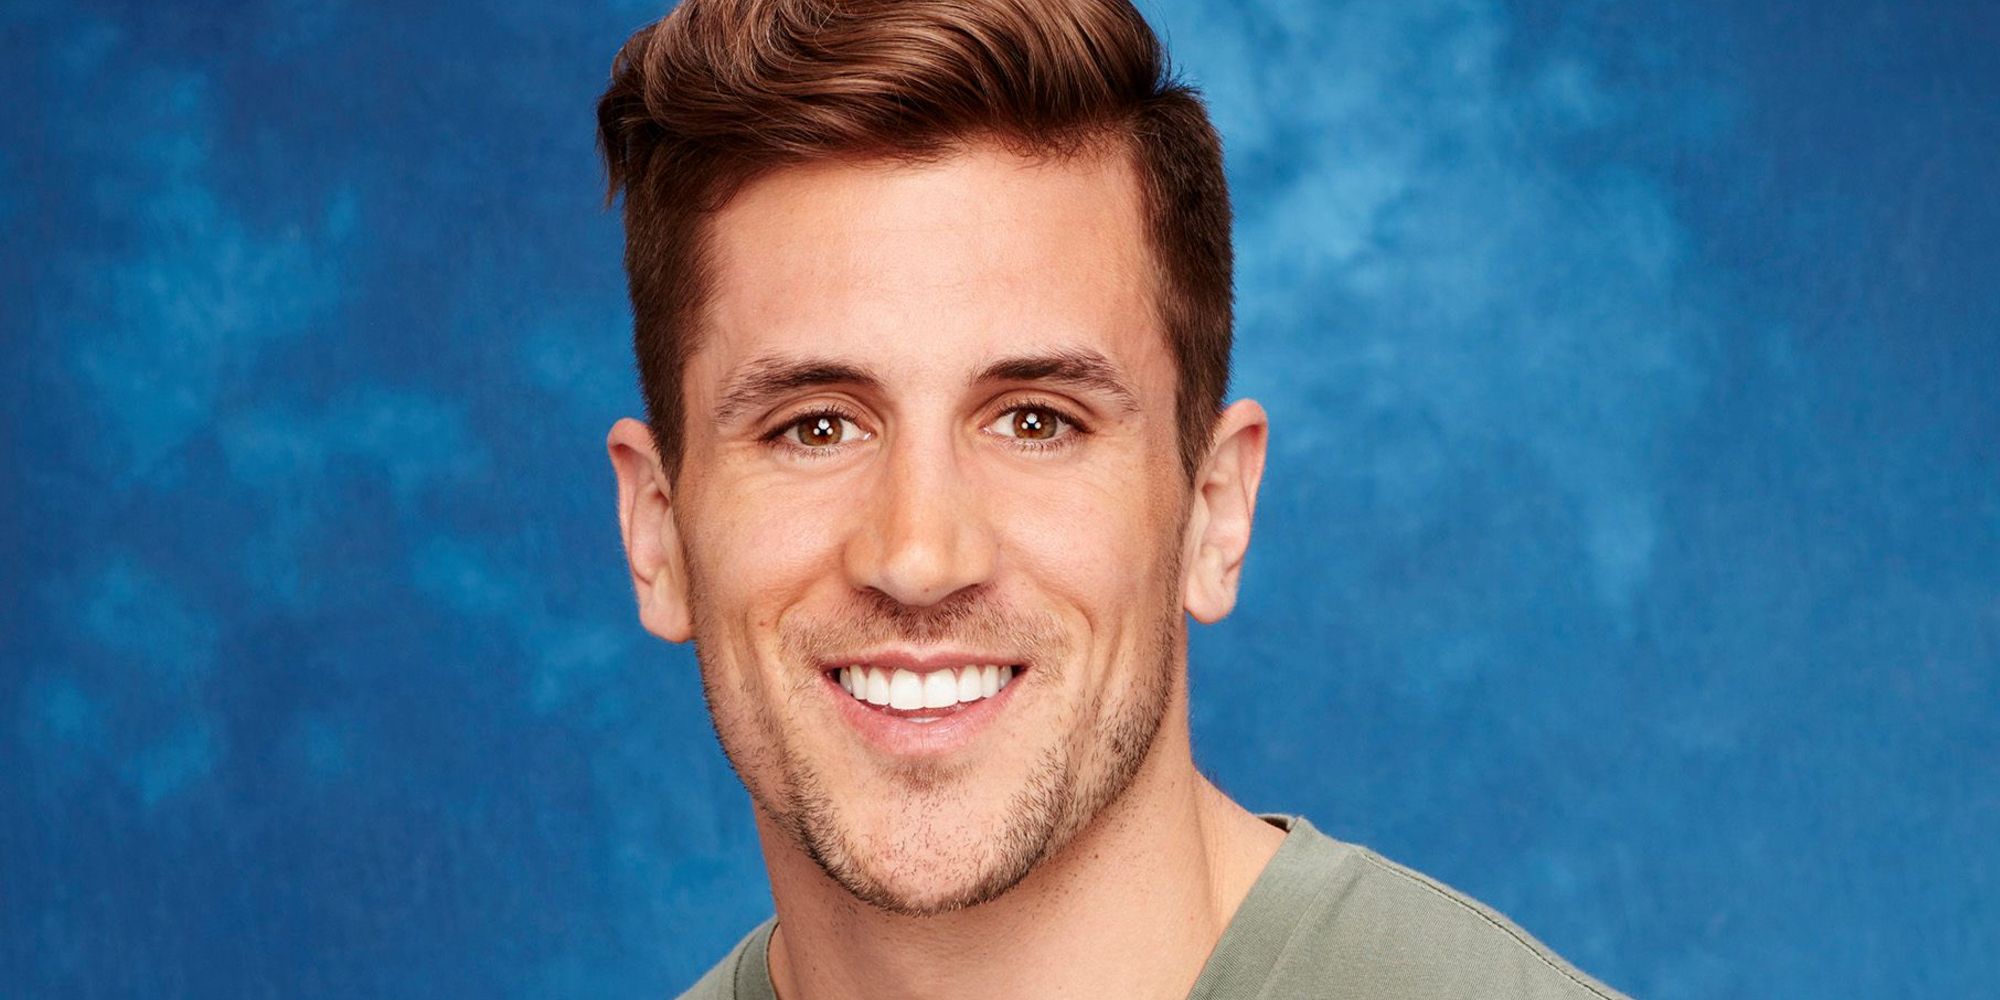 Jordan Rodgers smiling in a promo photo for The Bachelorette